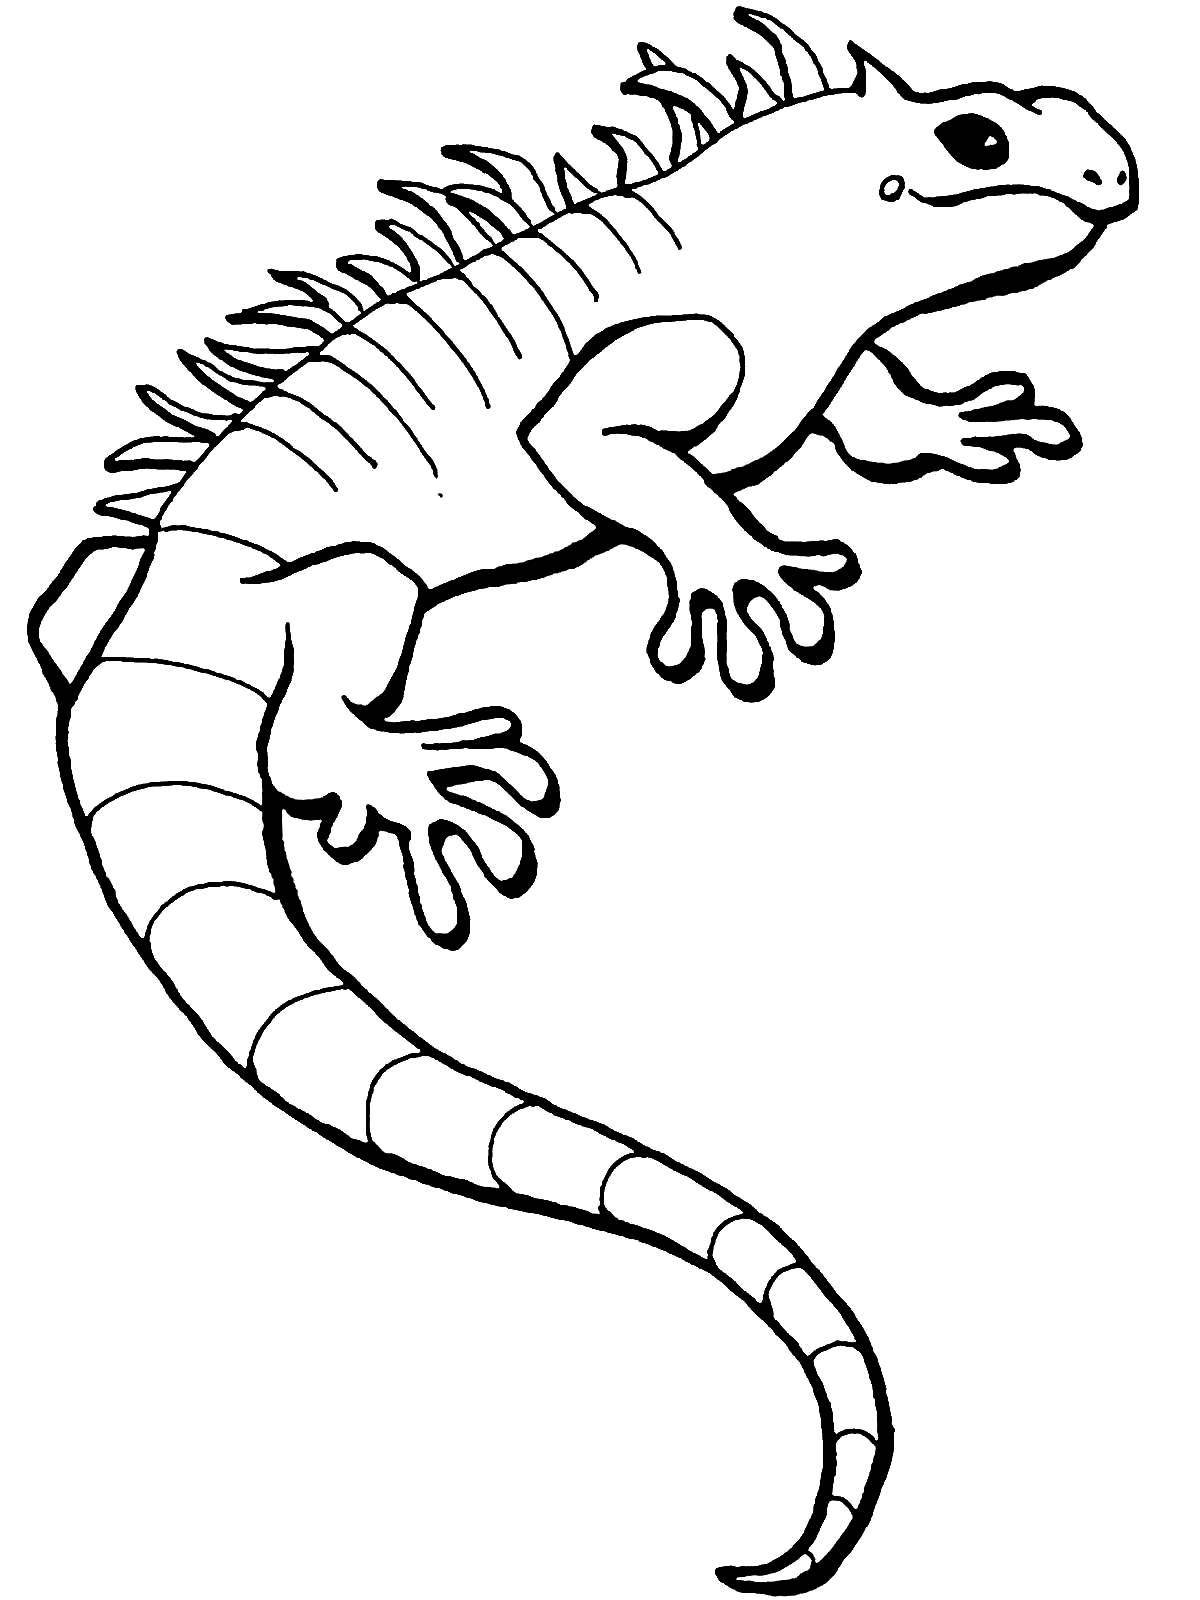 Colorful lizard coloring book for kids